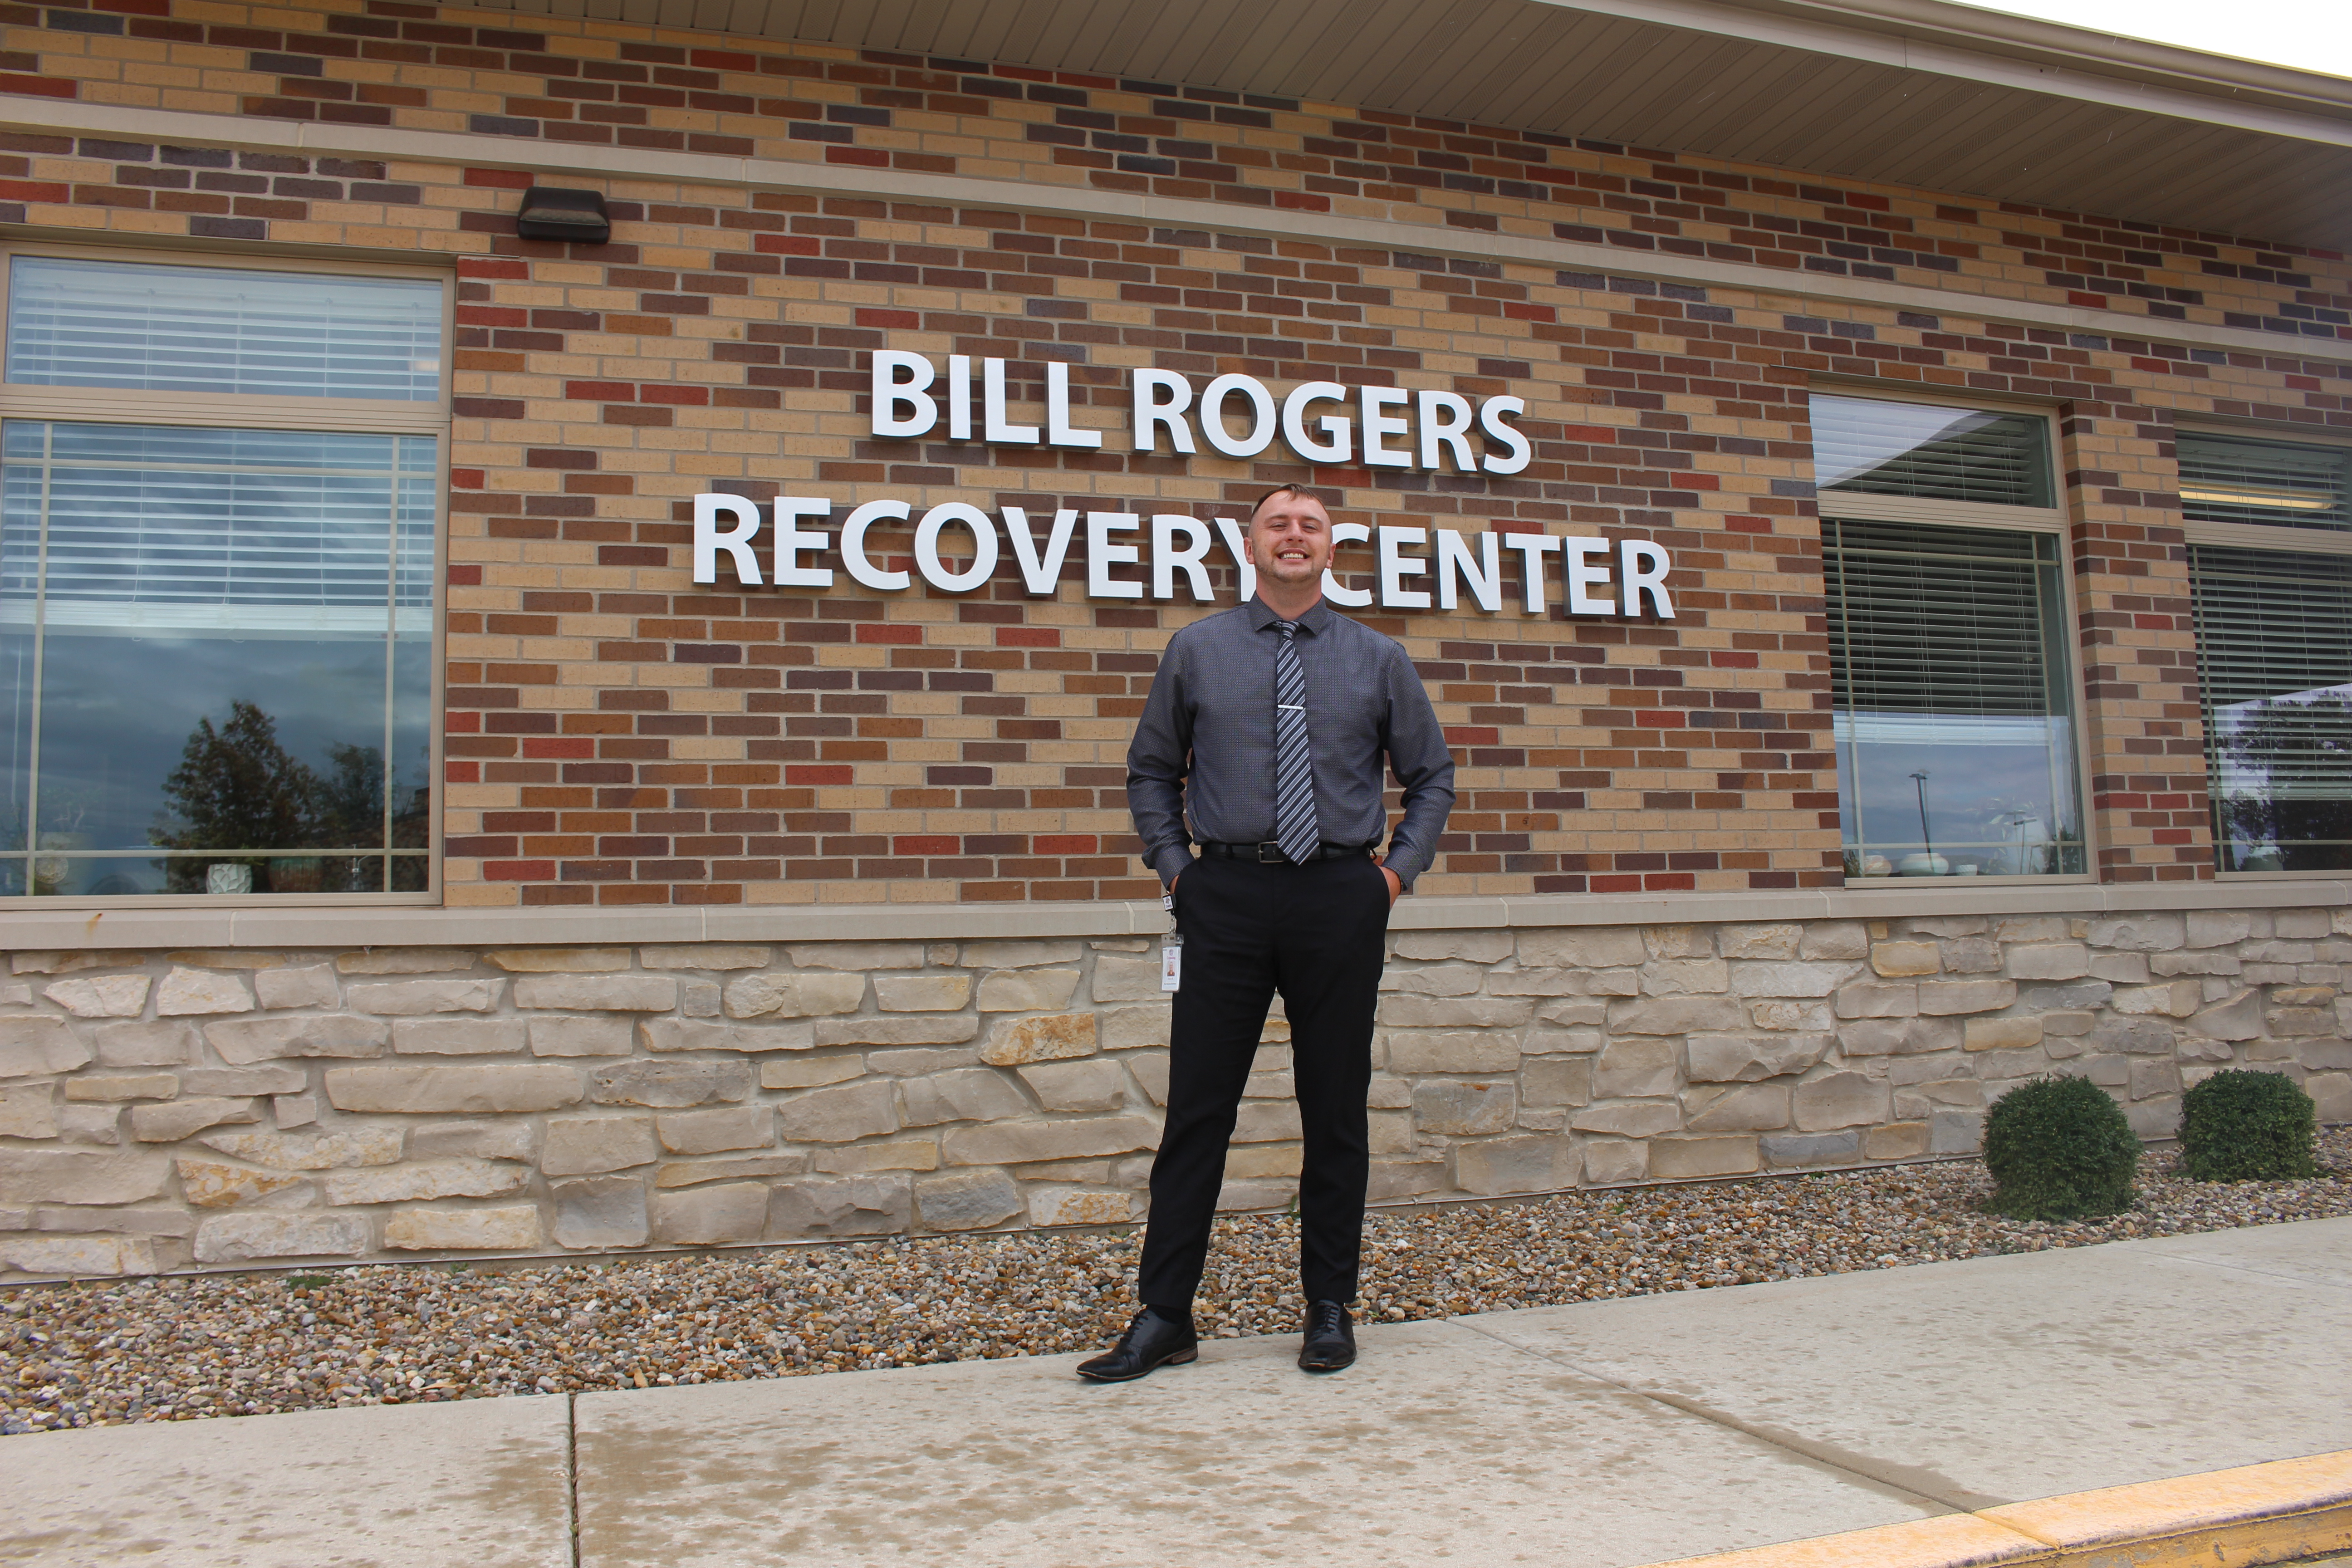 A  Million Gift to Build an Addiction Treatment Center. Then Staffers Had to Run It.